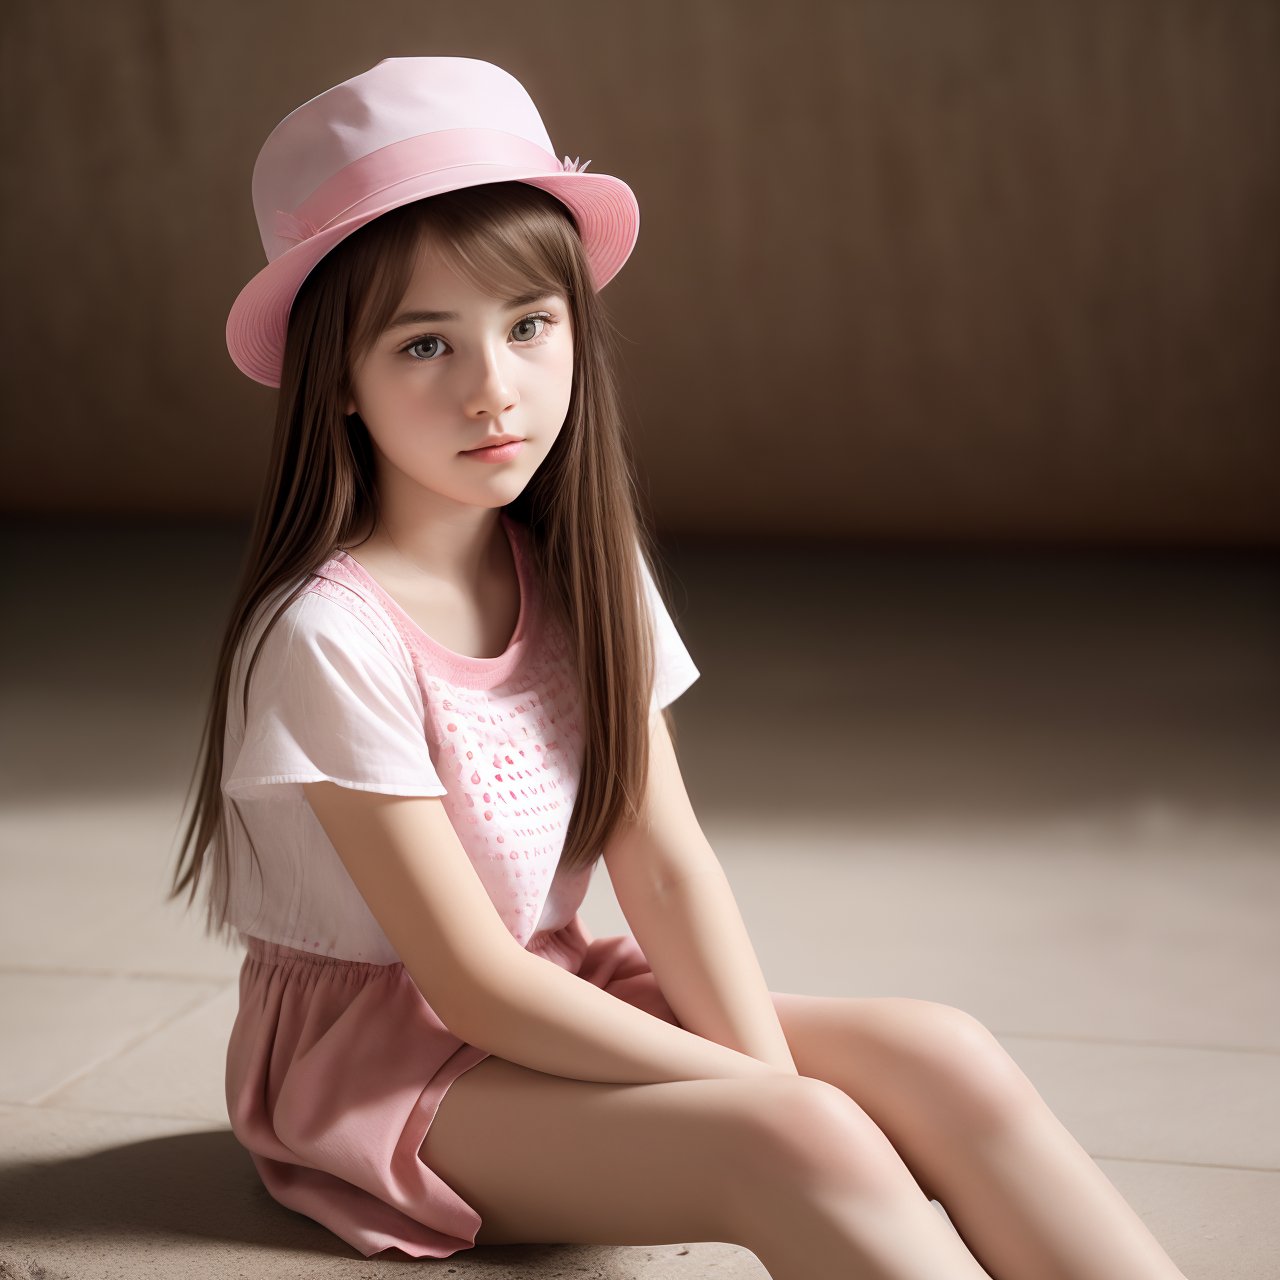 SFW, (masterpiece:1.3), wallpaper, full body portrait of stunning (AIDA_LoRA_HanF:1.05) <lora:AIDA_LoRA_HanF:0.83> in a pink shirt and with a white hat sitting on the floor, stone floor, stone surface, stone texture, young girl, pretty face, intimate, intricate pattern, studio photo, kkw-ph1, hdr, f1.5, getty images